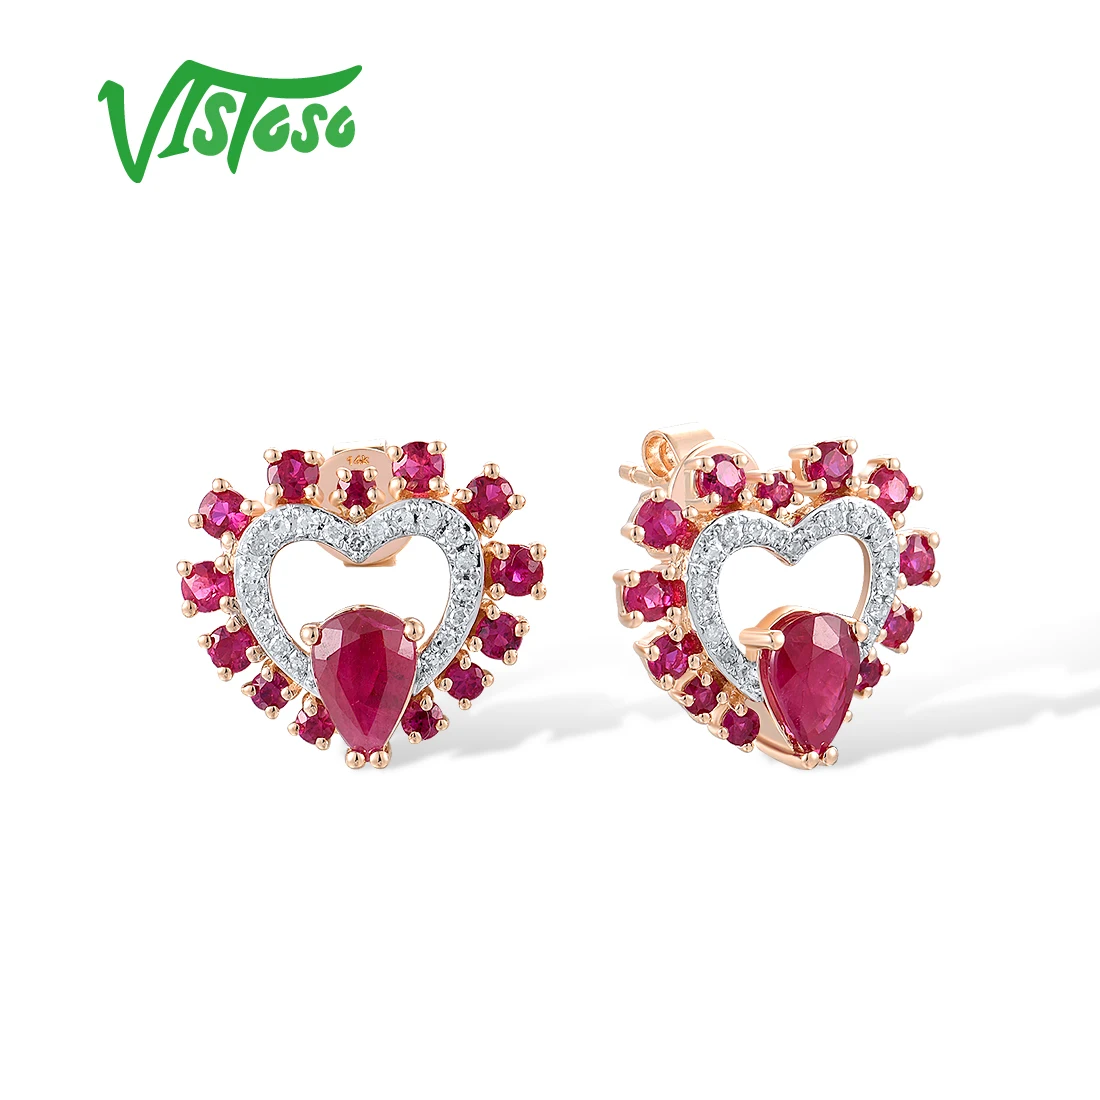 

VISTOSO Authentic 14K 585 Rose Gold Stud Earrings For Women Sparkling Natural Diamonds Ruby Heart Shaped Cute Fine Jewelry